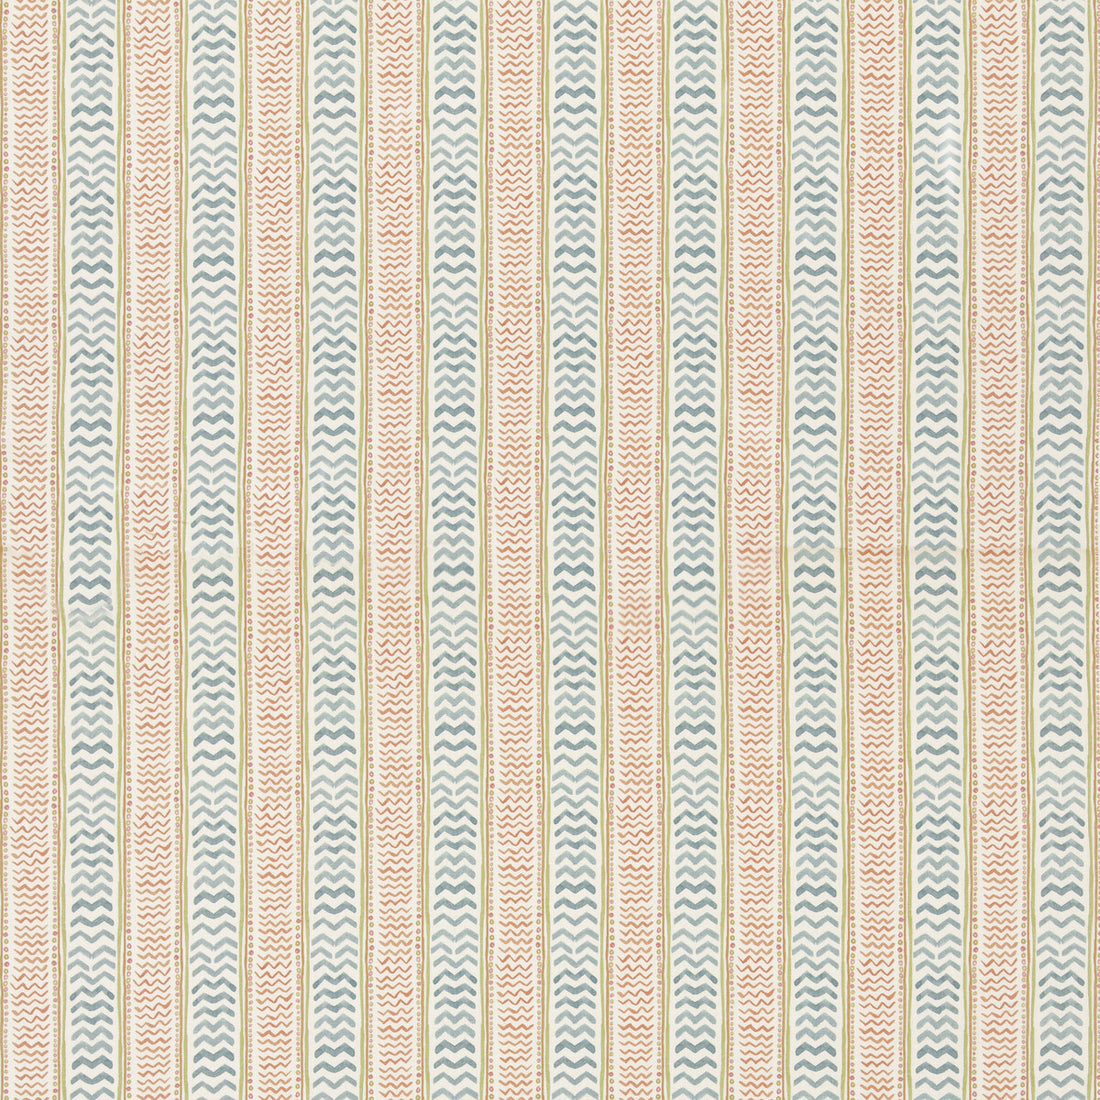 Wriggle Room fabric in teal/spice color - pattern BP11050.5.0 - by G P &amp; J Baker in the X Kit Kemp Prints And Embroideries collection